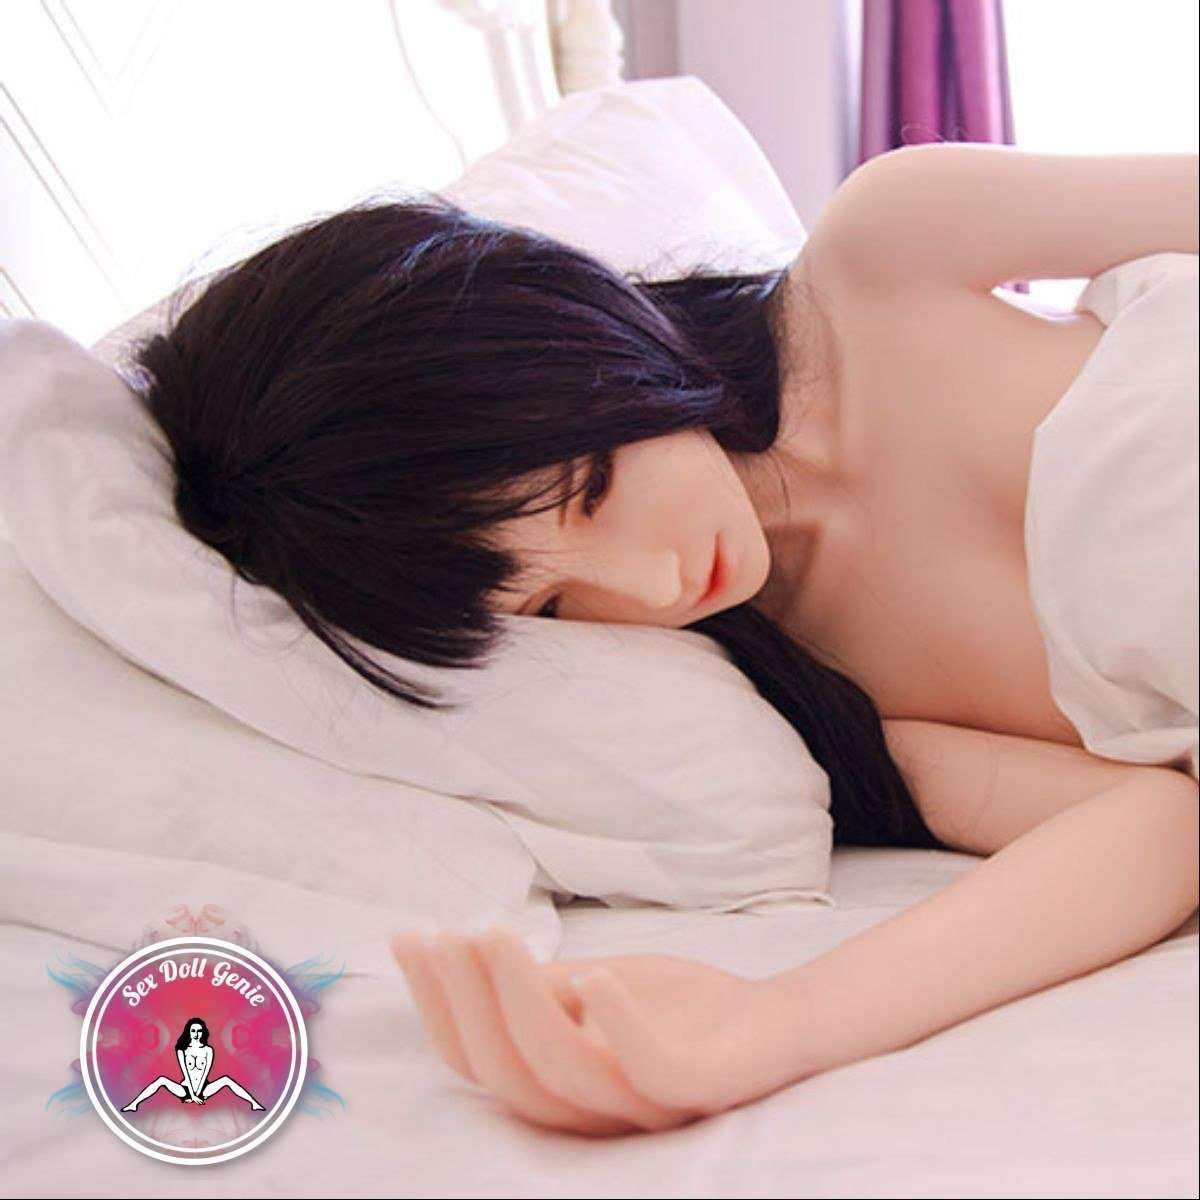 DS Doll - 163Plus - Jiaxin Head - Type 2 D Cup Silicone Doll-10